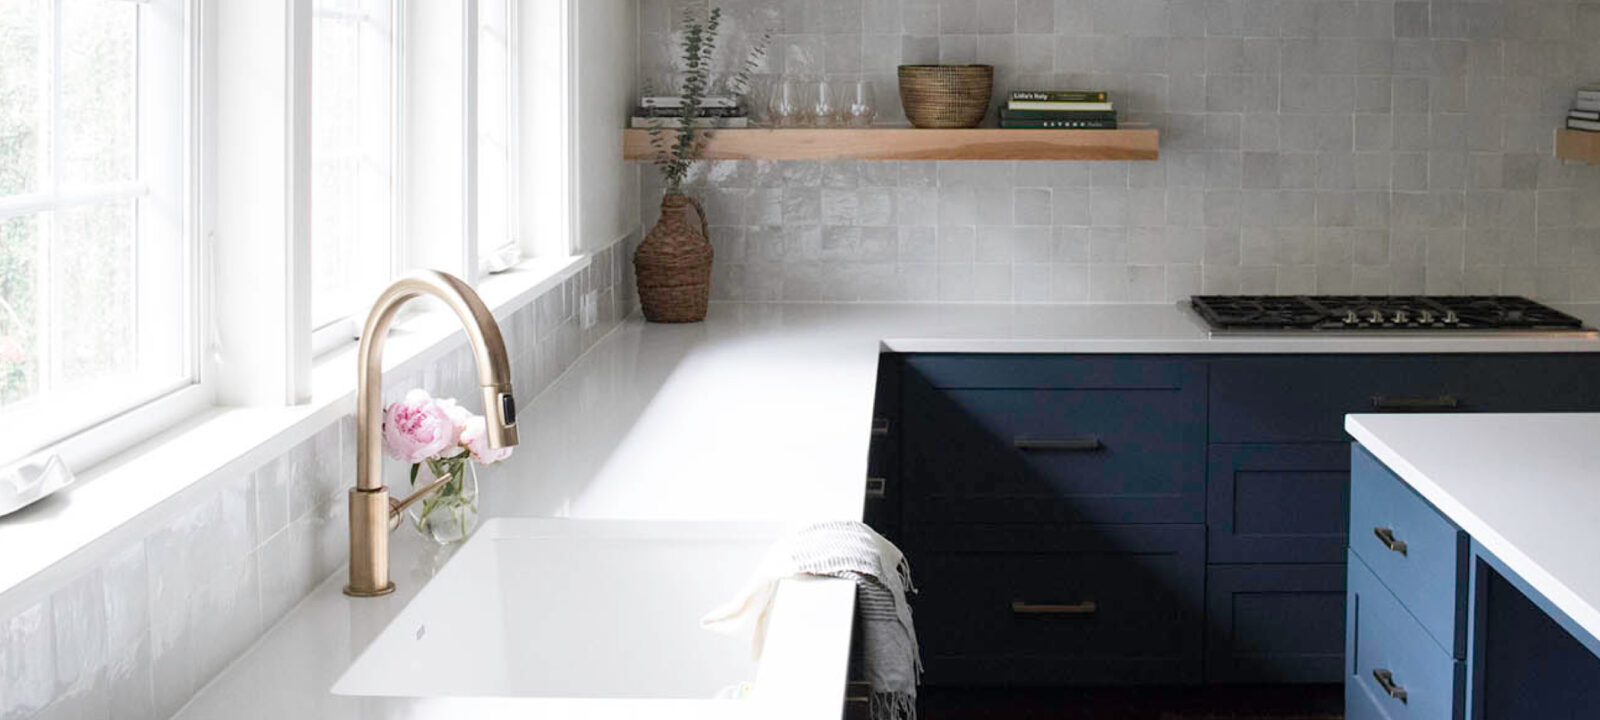 How to Pick Your Kitchen Countertops in 5 Steps